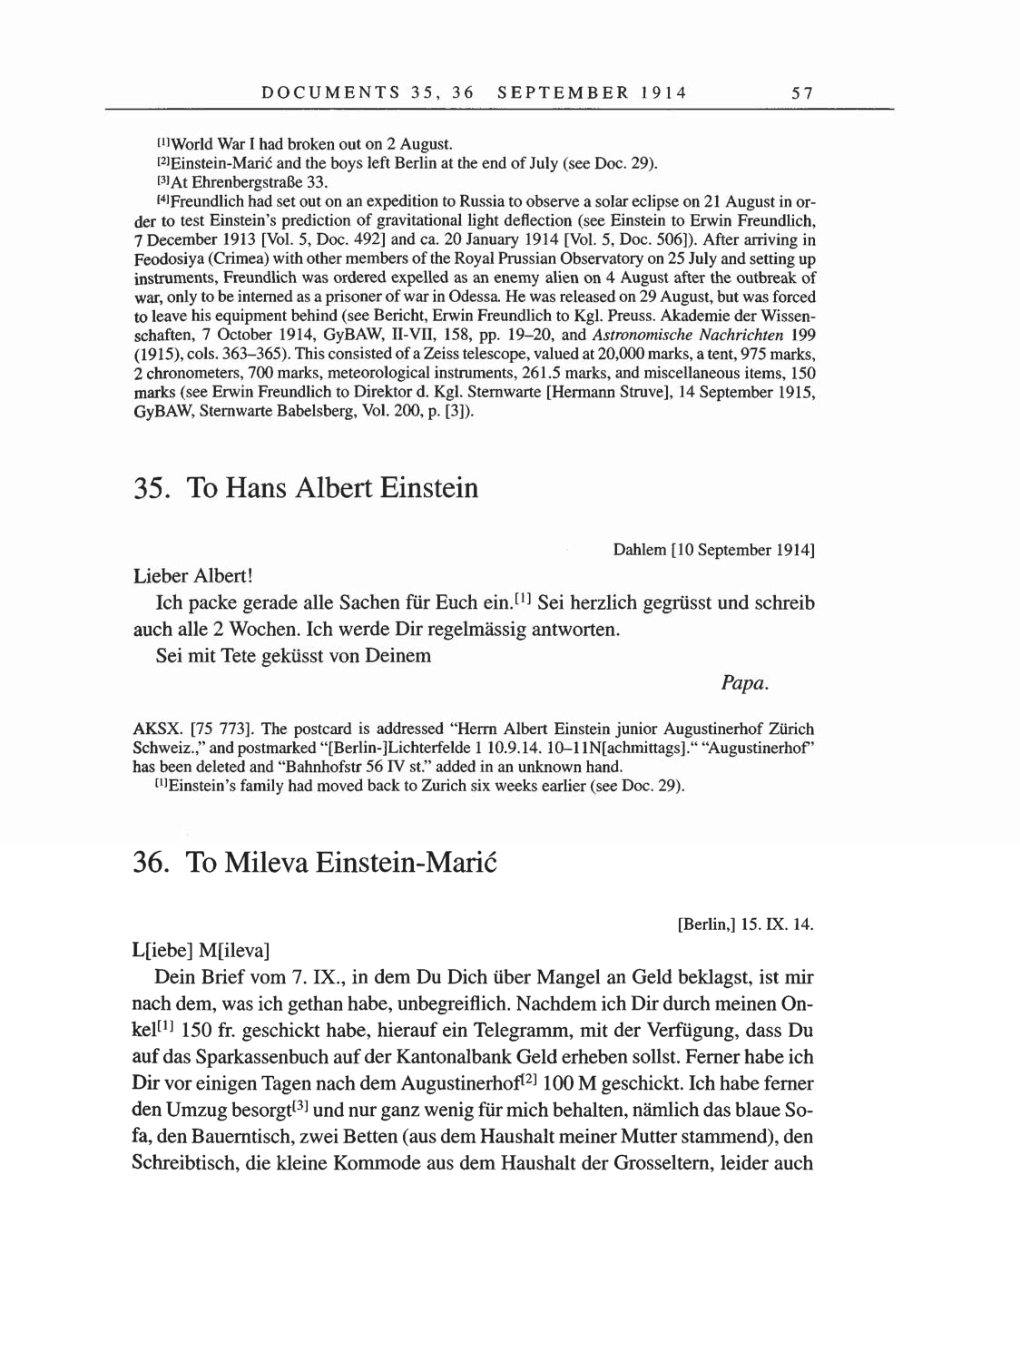 Volume 8, Part A: The Berlin Years: Correspondence 1914-1917 page 57